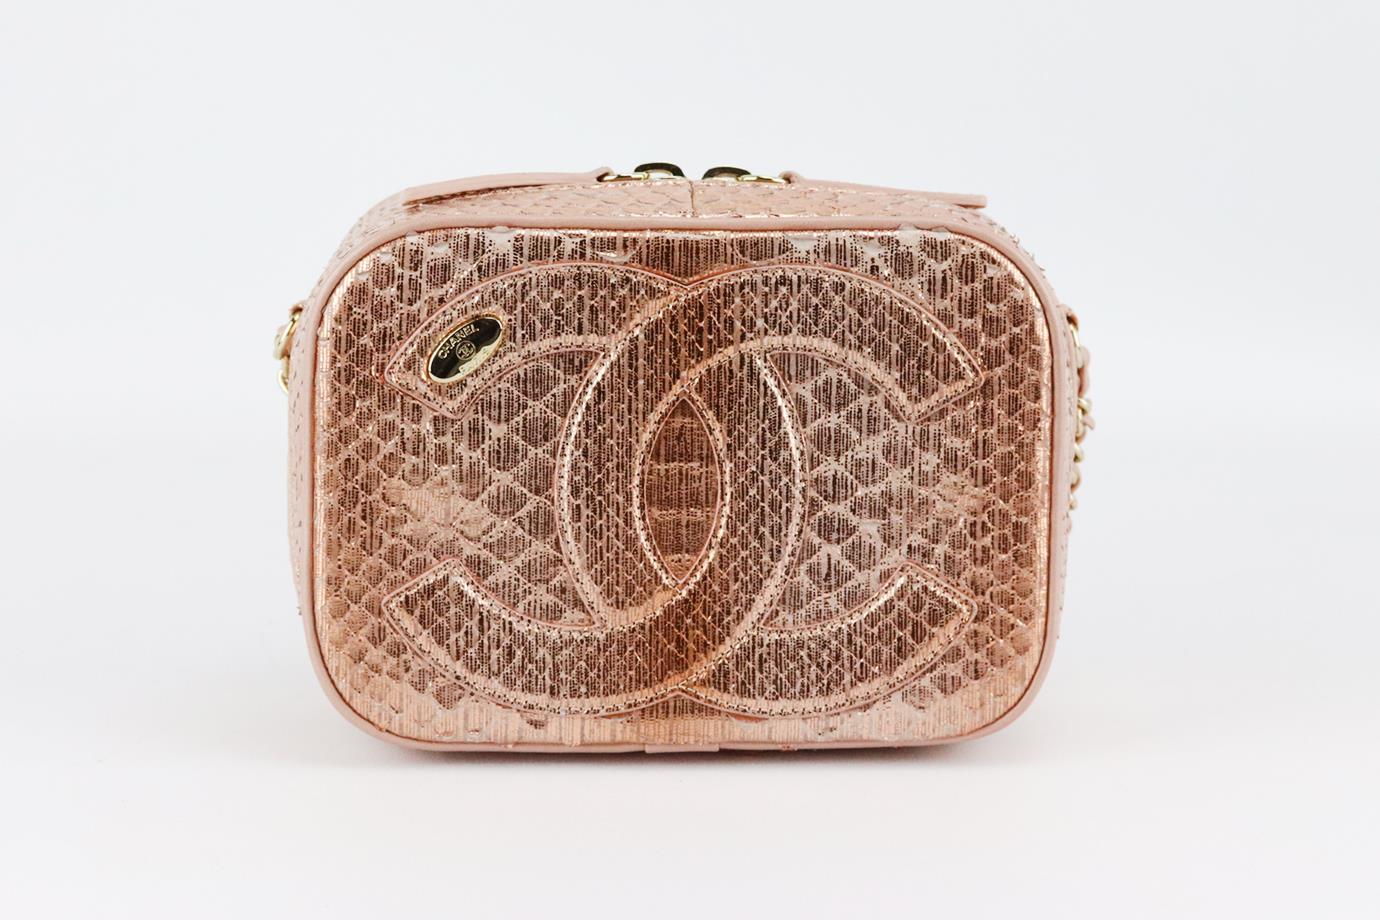 CHANEL 2019 MANIA CAMERA CASE METALLIC PYTHON AND LEATHER SHOULDER